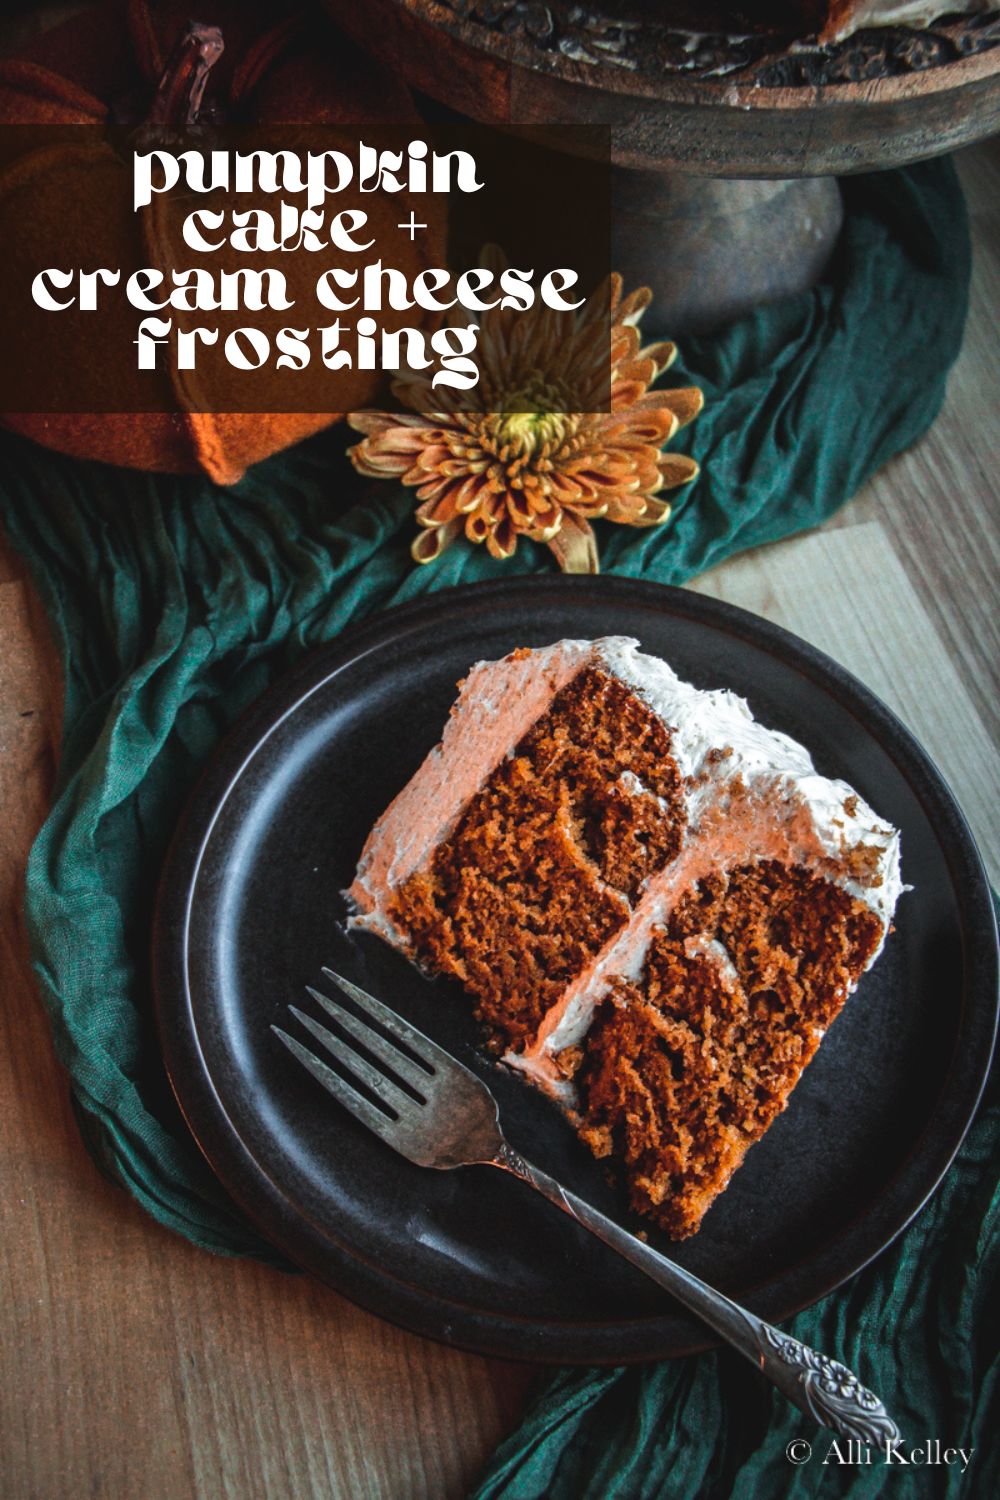 This layered pumpkin spice cake is not only a show-stopper, it is super easy to make! Moist, delicious and bursting with pumpkin and pumpkin spice flavor! #pumpkin #pumpkinspice #pumpkinlayercake #pumpkincake #pumpkinrecipe #pumpkindessert #pumpkinrecipe #pumpkinseason #fallbaking #fallbakingrecipe #seasonalrecipe #thanksgivingrecipe